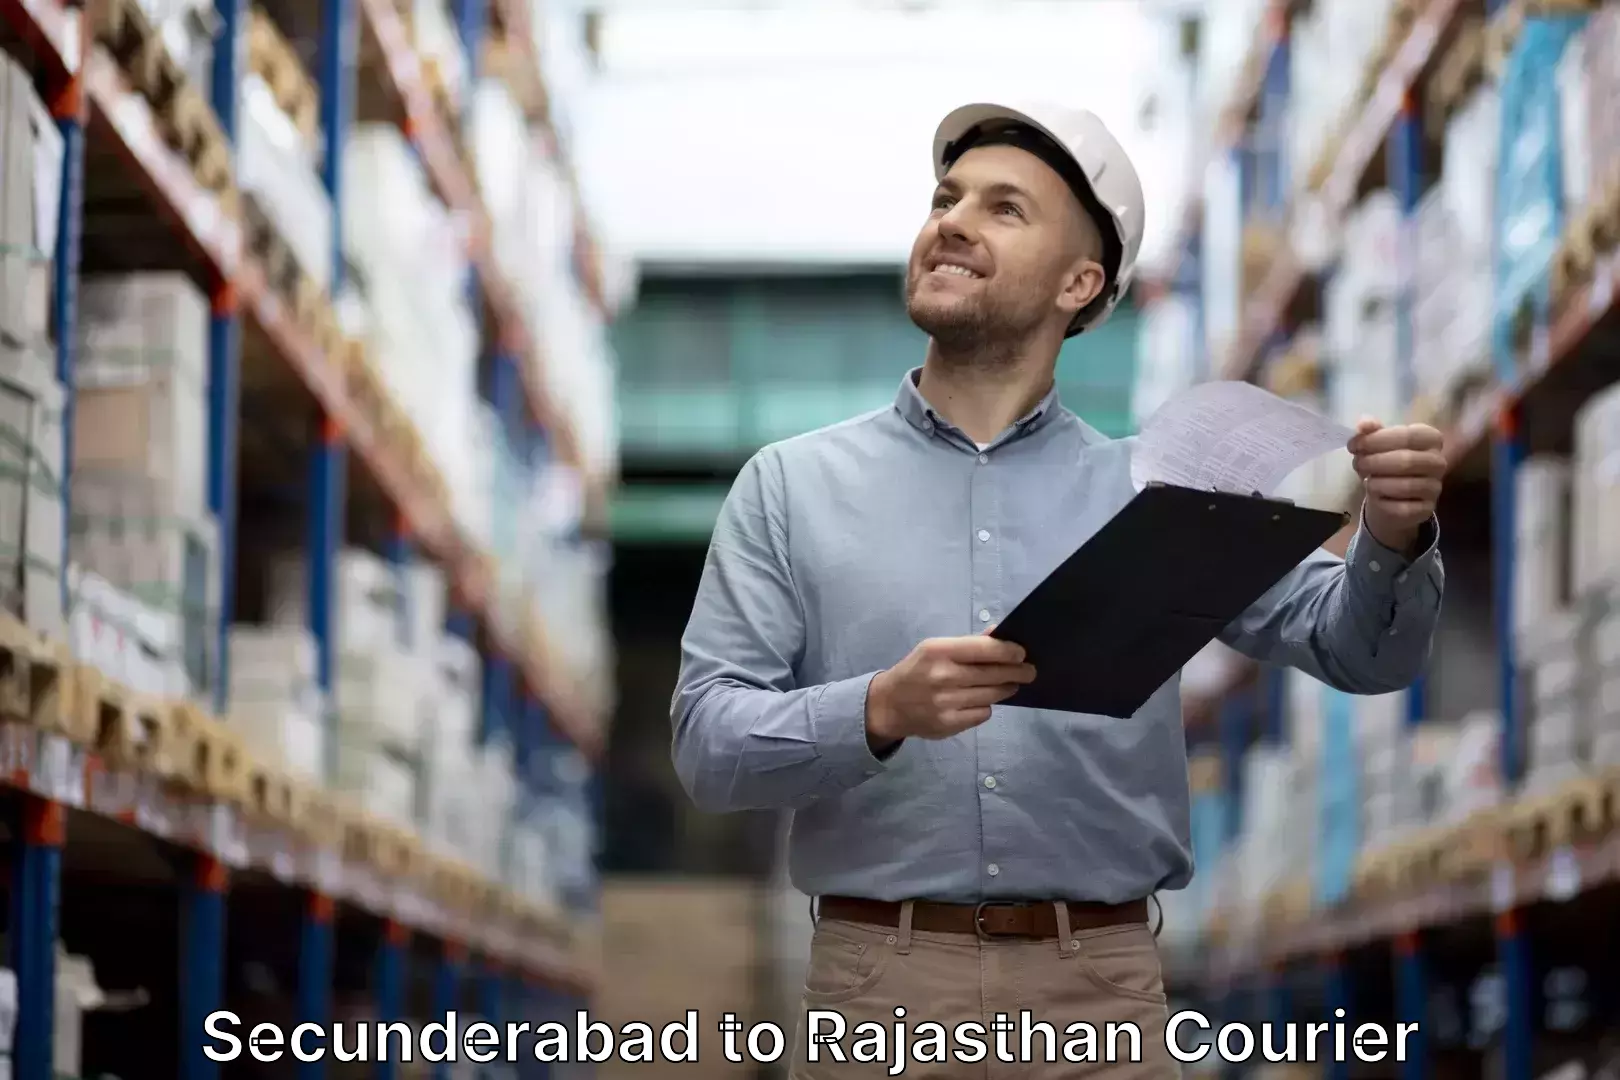 Luggage transport consultancy Secunderabad to Rajasthan